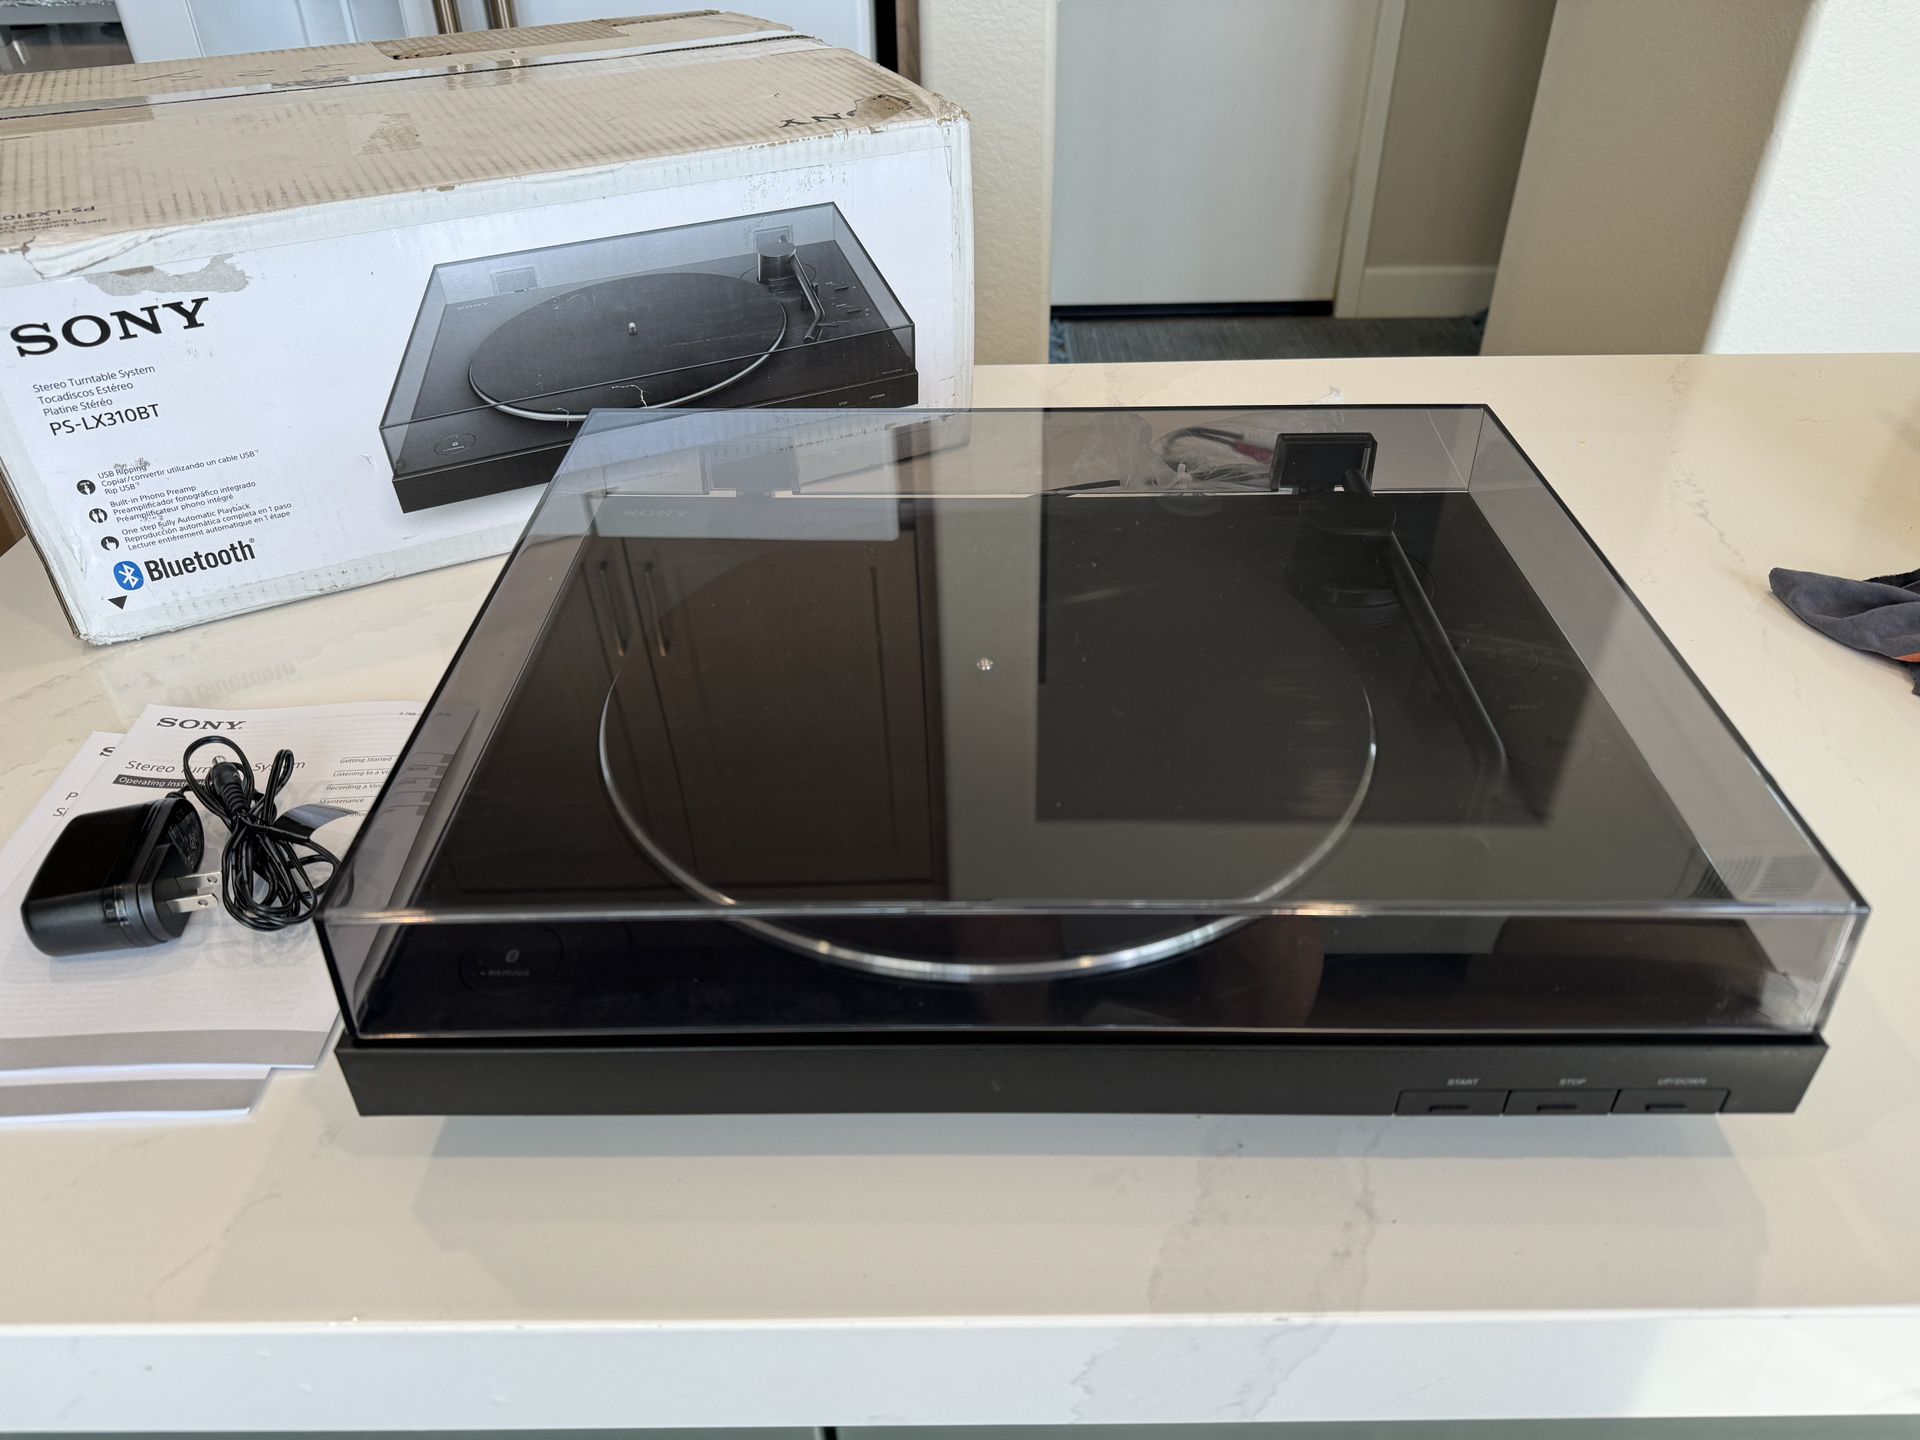 Sony PS-LX310BT Stereo Turntable With Bluetooth and USB